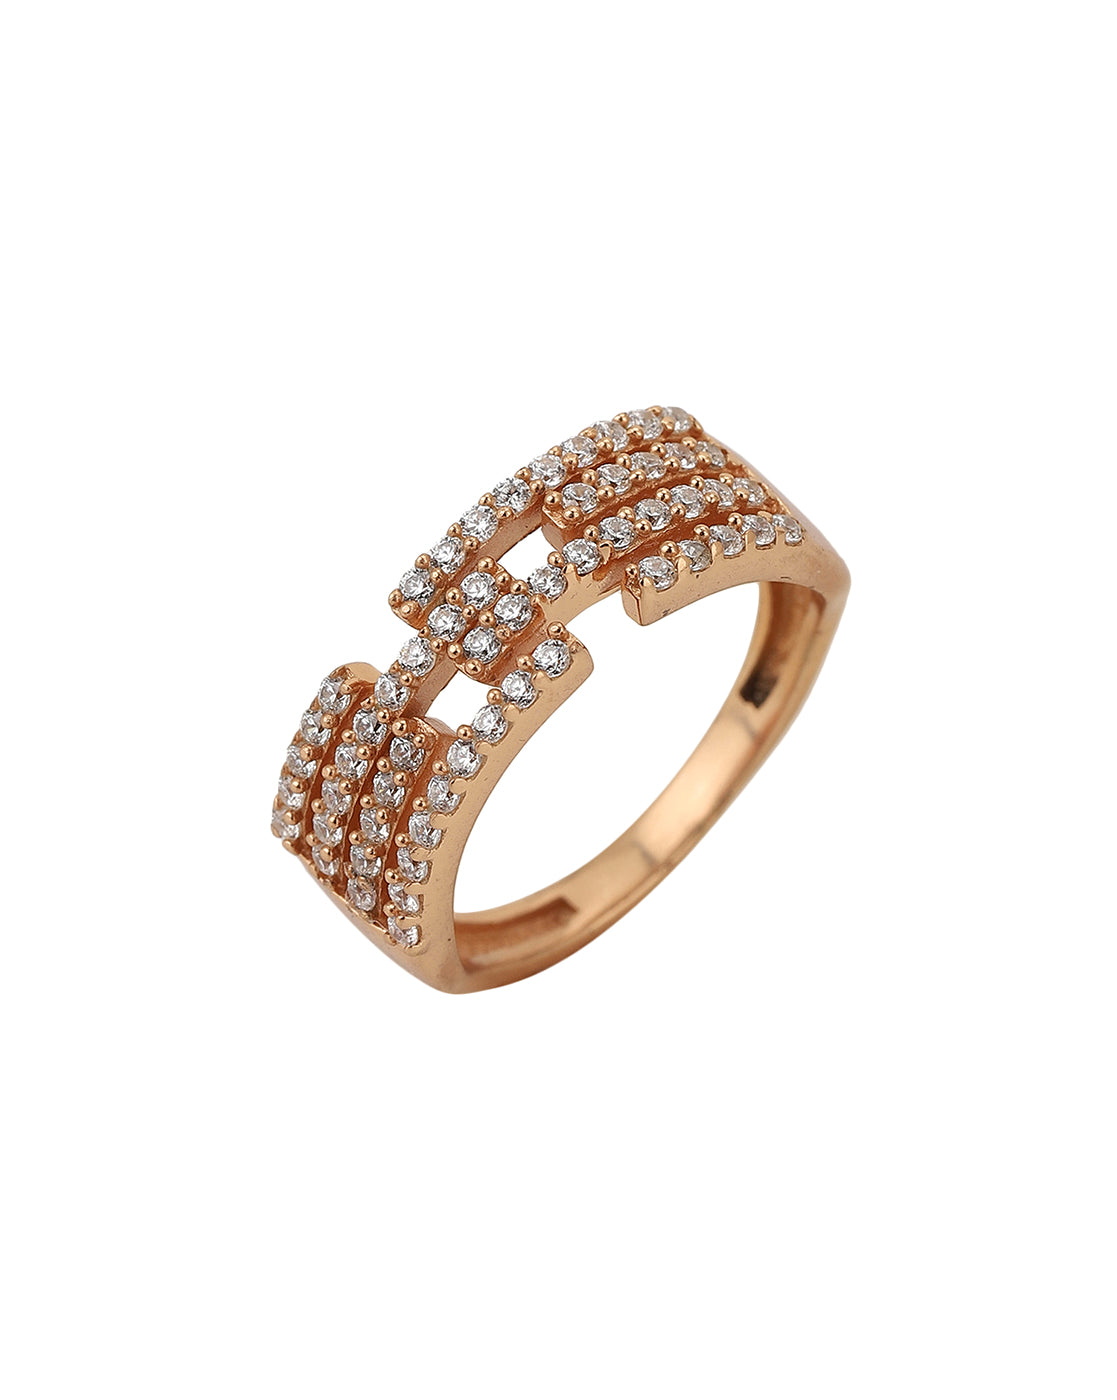 Carlton London Rose Gold Plated Cz Studded Adjustable Contemporary Finger Ring For Women